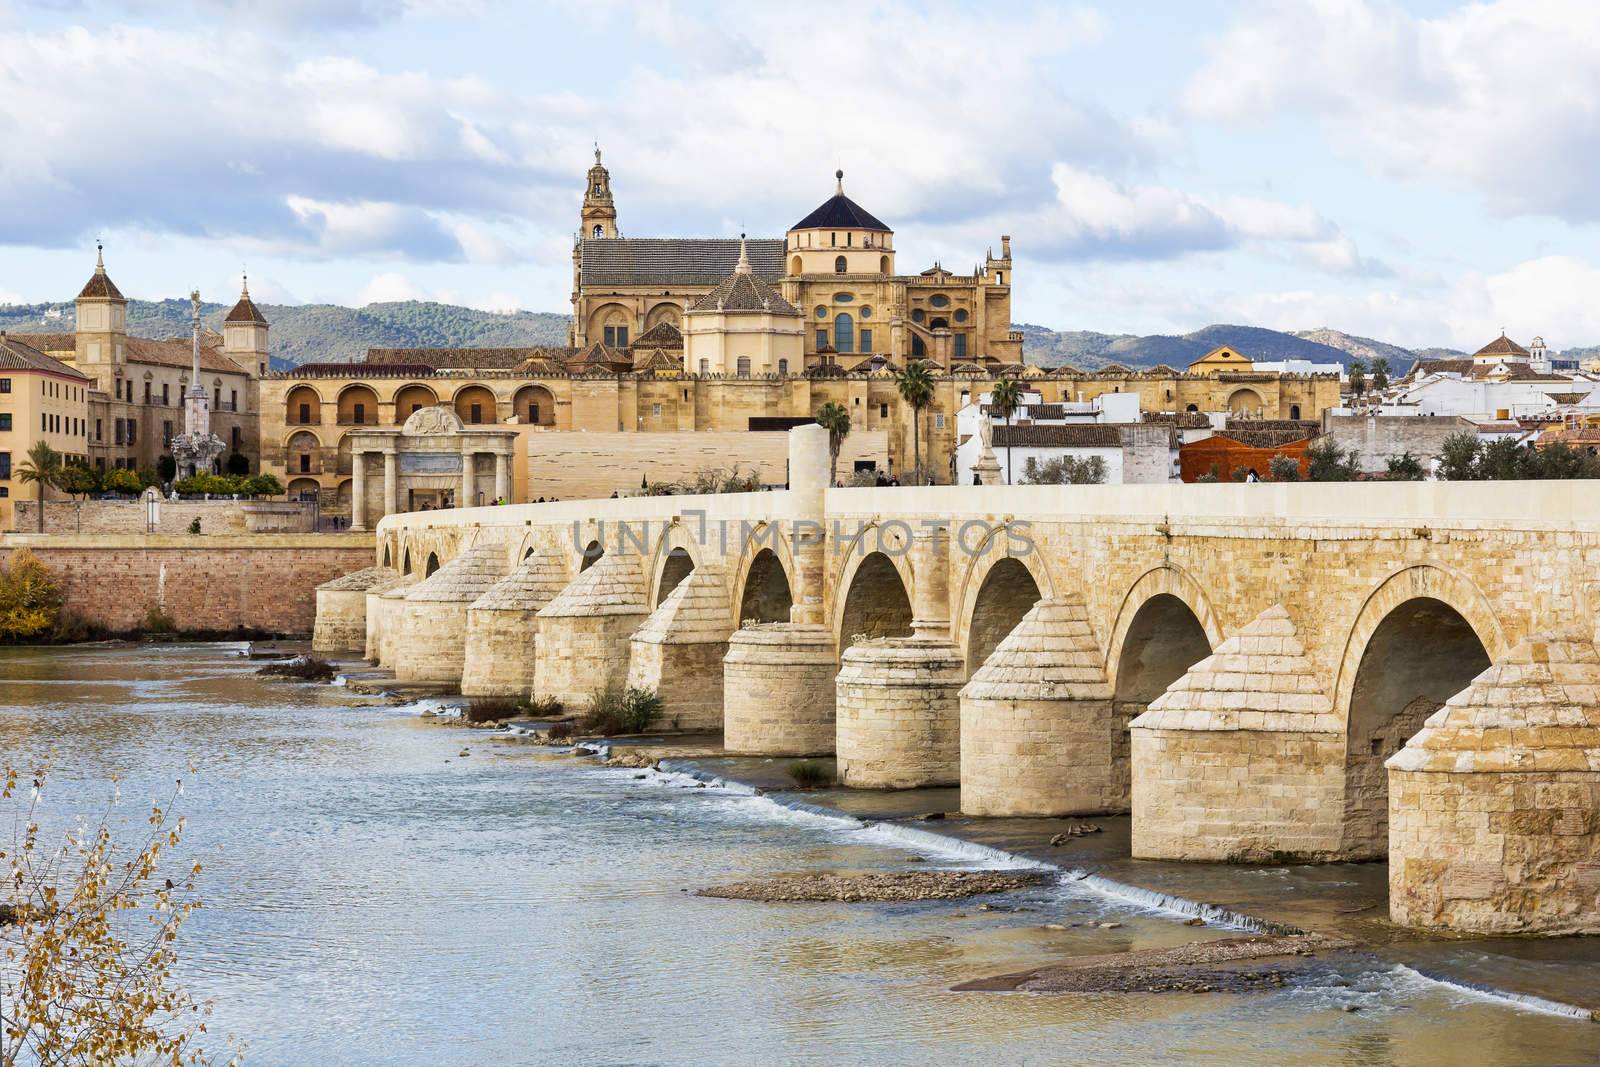 Ancient Roman Bridge across the river Guadalquivir in Cordoba. Cordoba Mosque and Cathedral is in the background. This bridge was featured in TV series Game of Thrones as the Long Bridge of Volantis.
